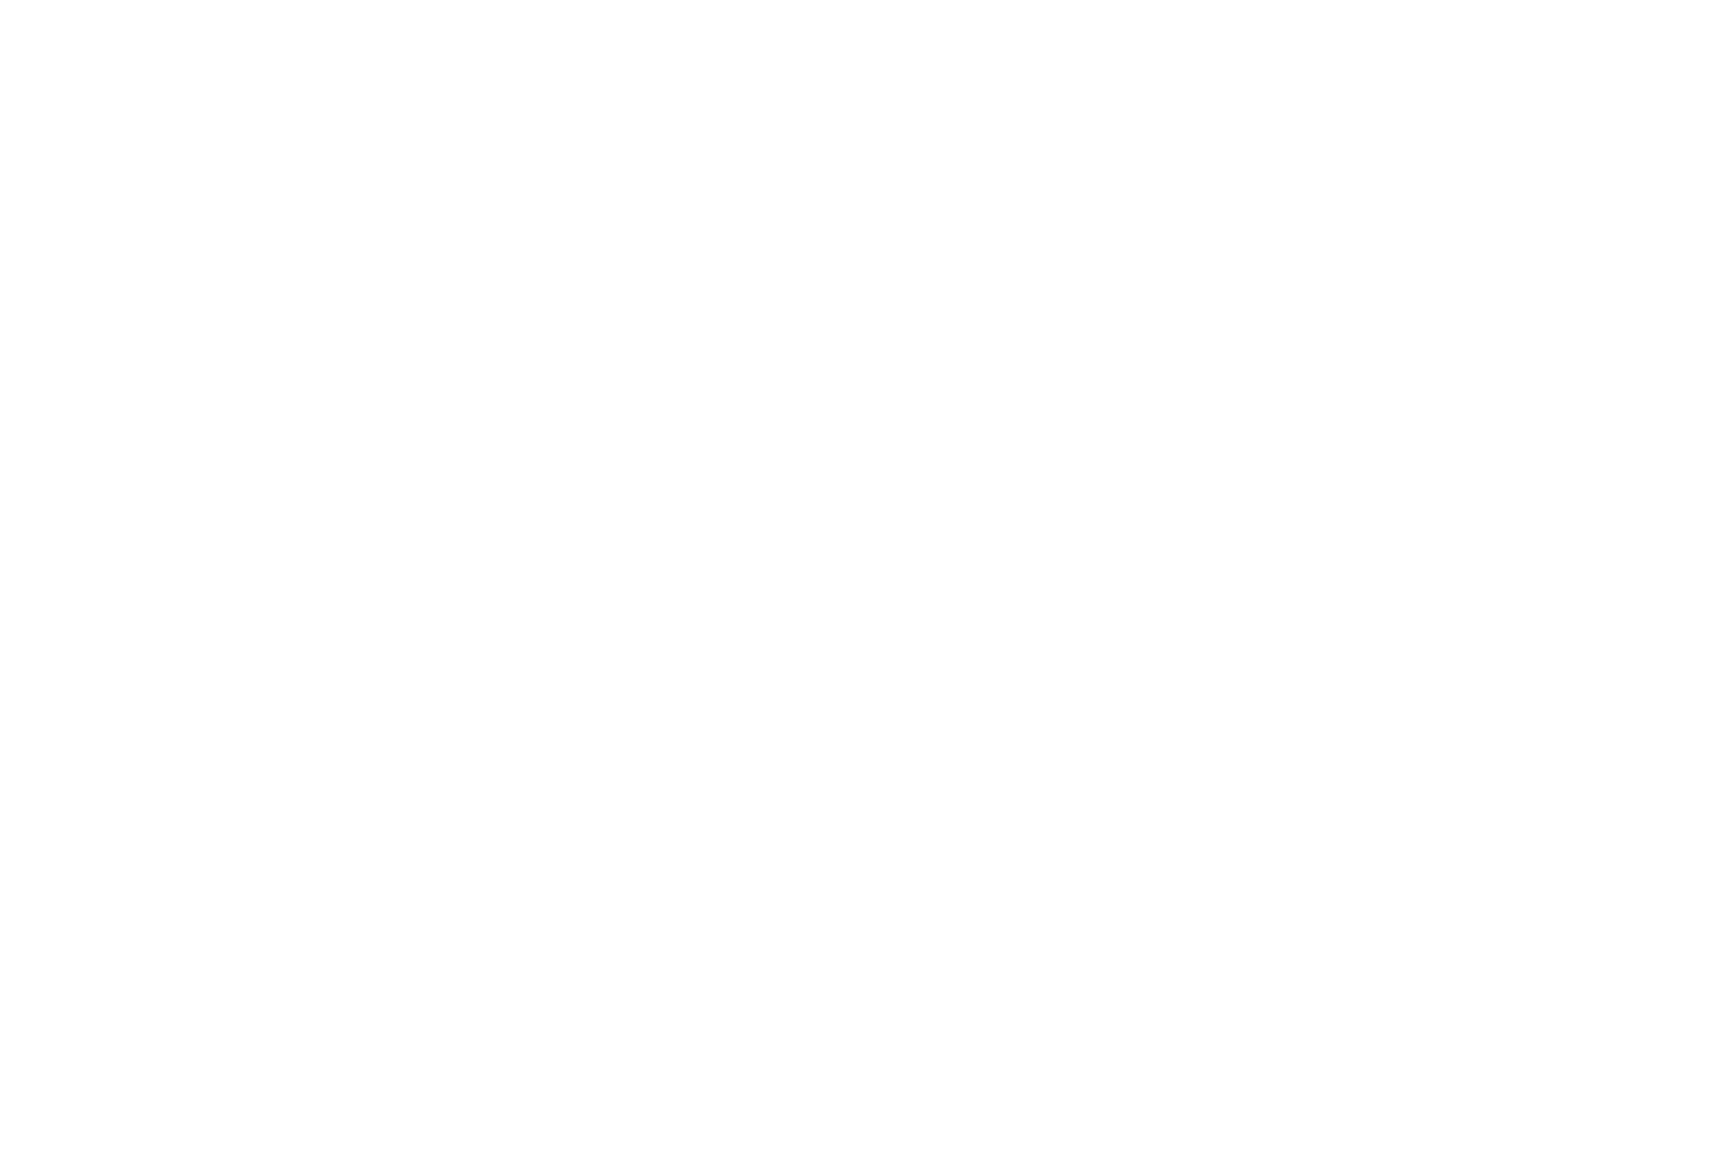 OFFICIAL SELECTION - Vision Film Festival - 2021 (1) (1)